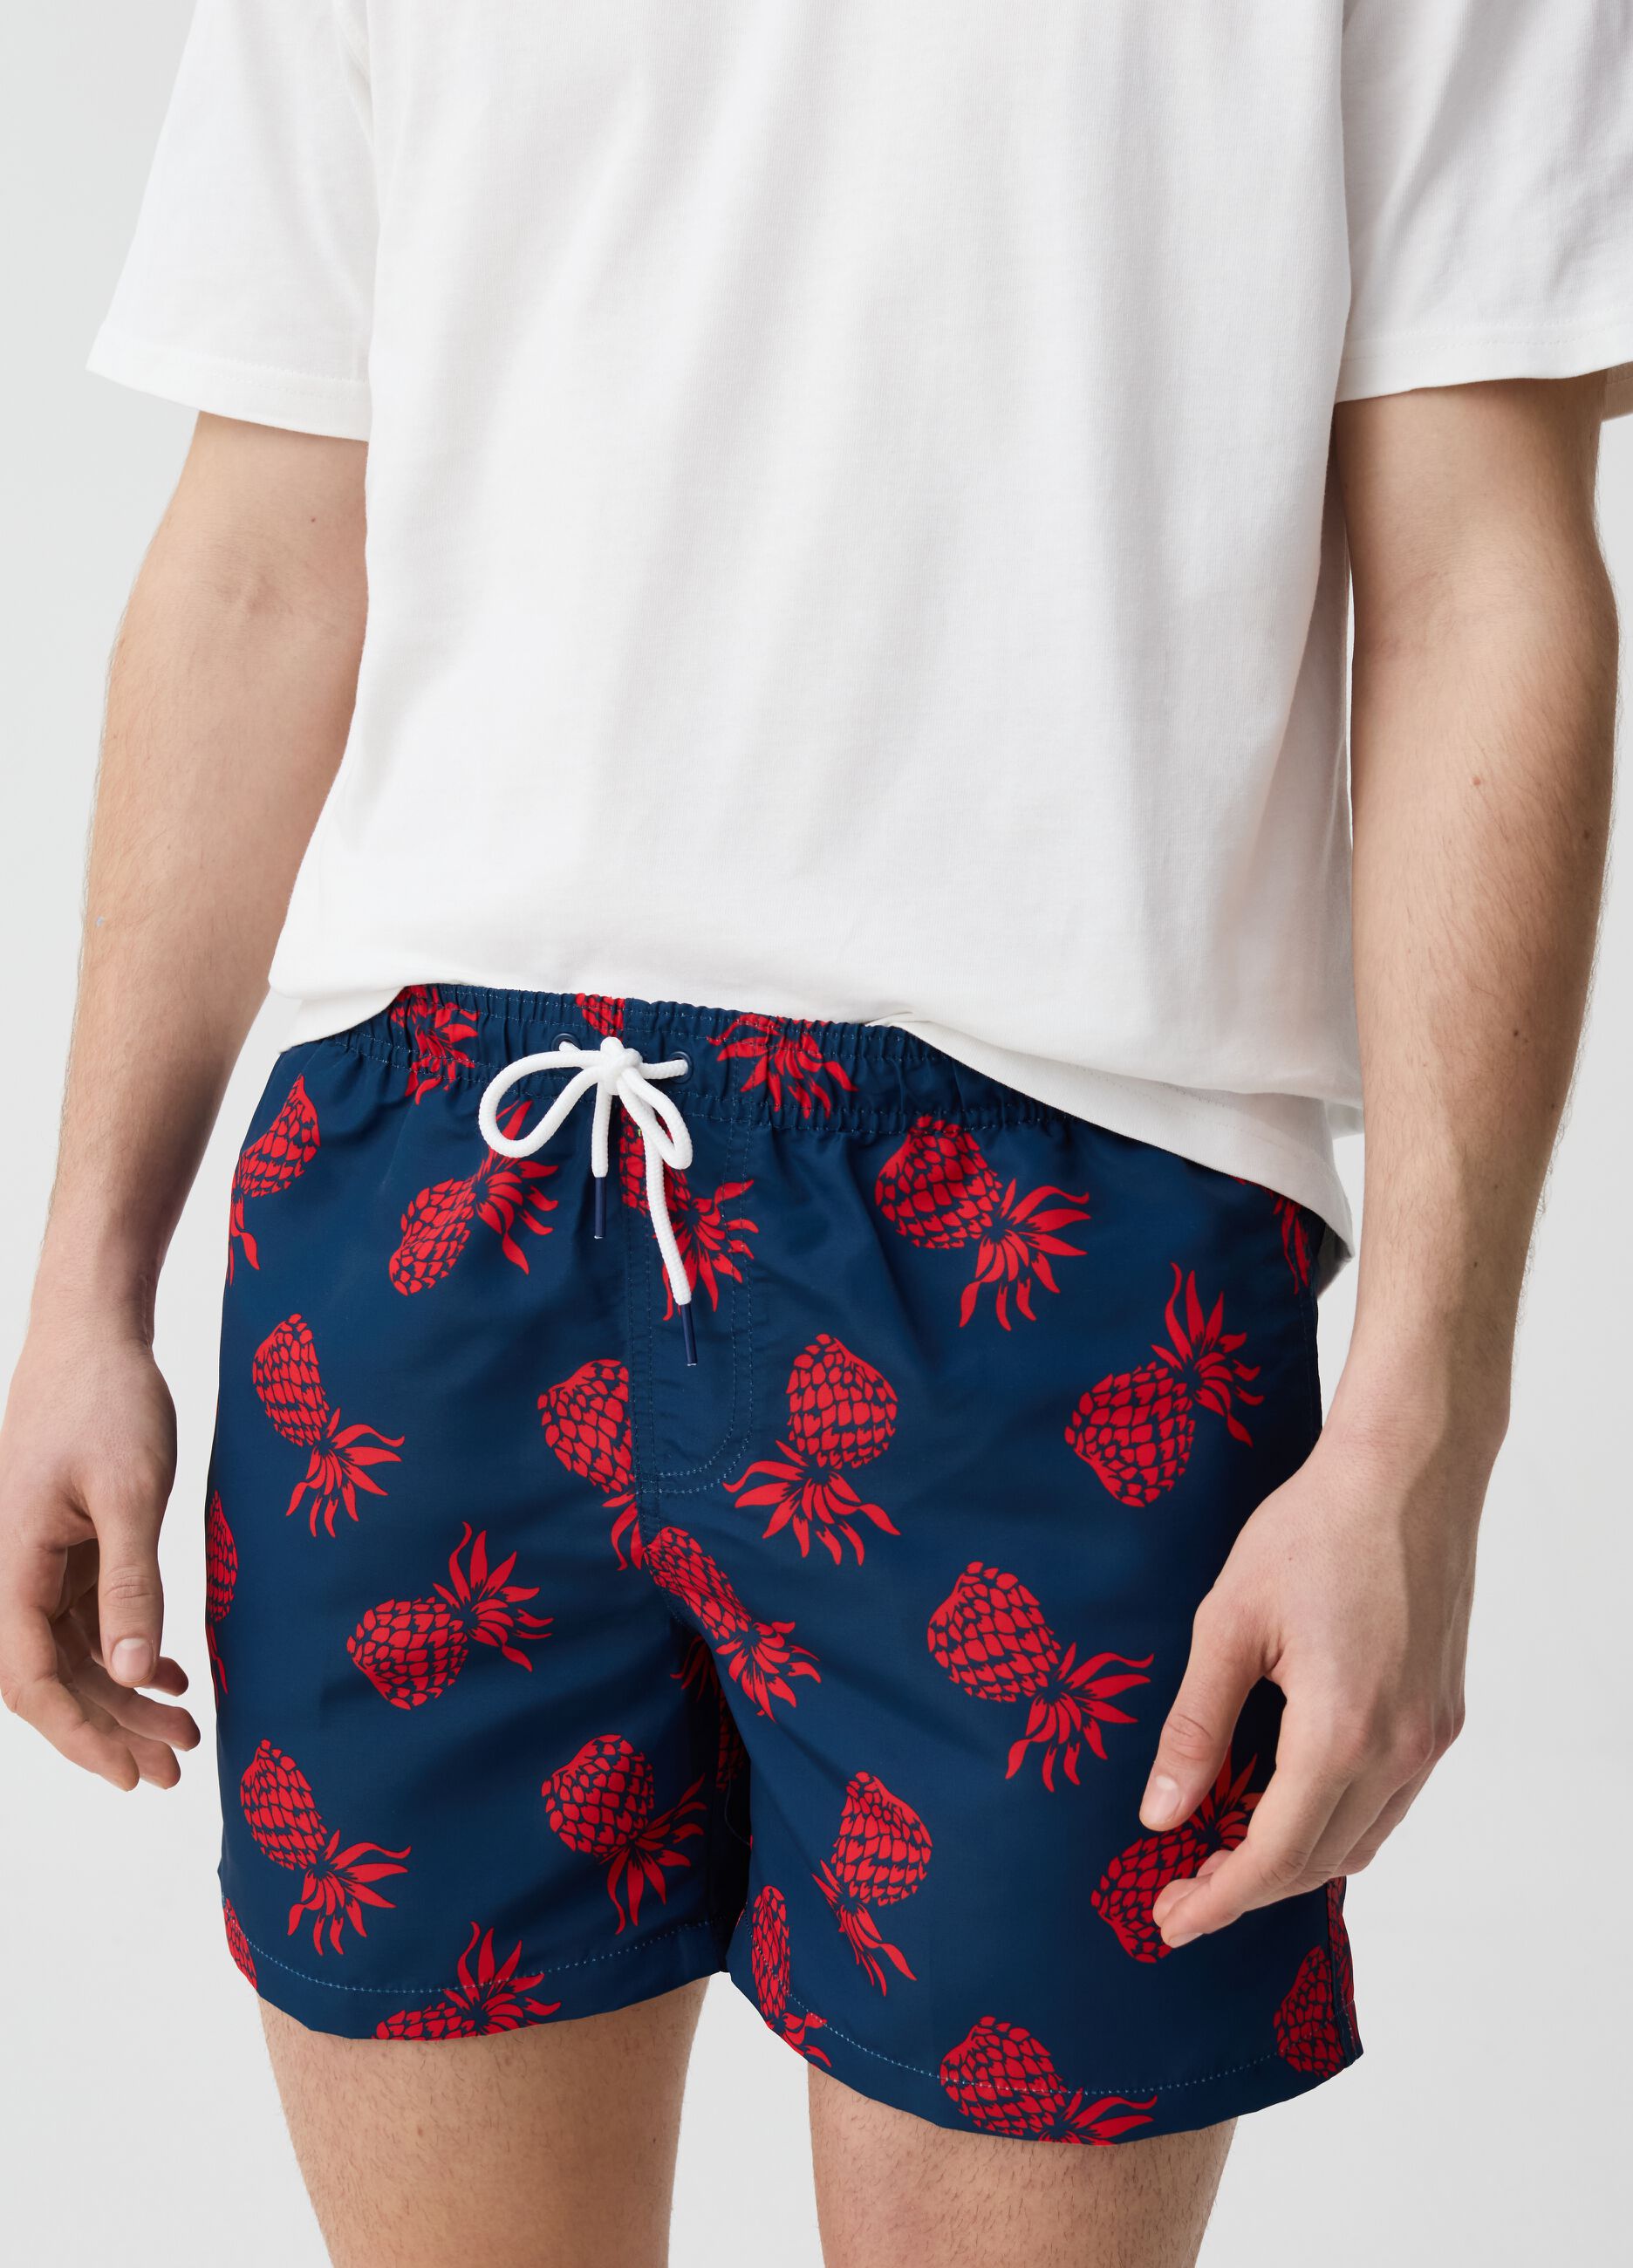 Swimming trunks with pineapples print